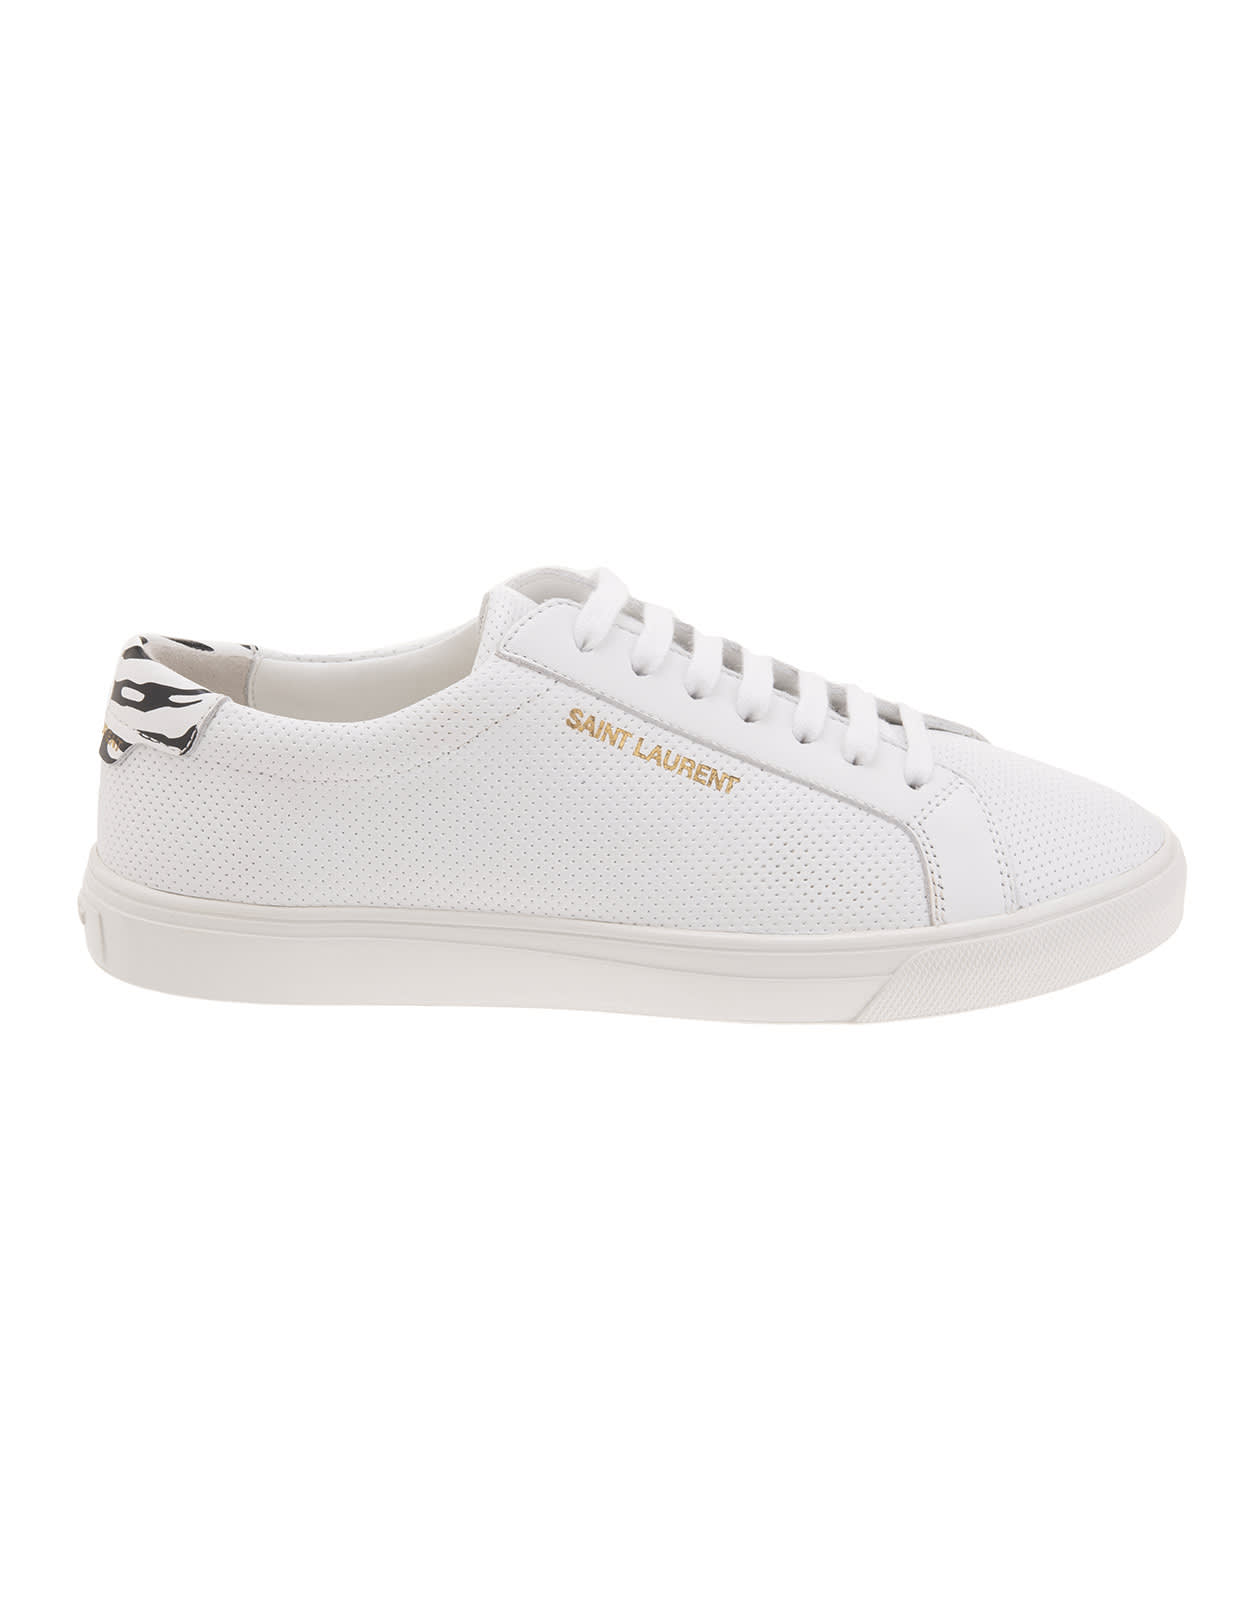 Saint Laurent Woman Andy Sneakers In White Perforated Leather And Zebra Leather